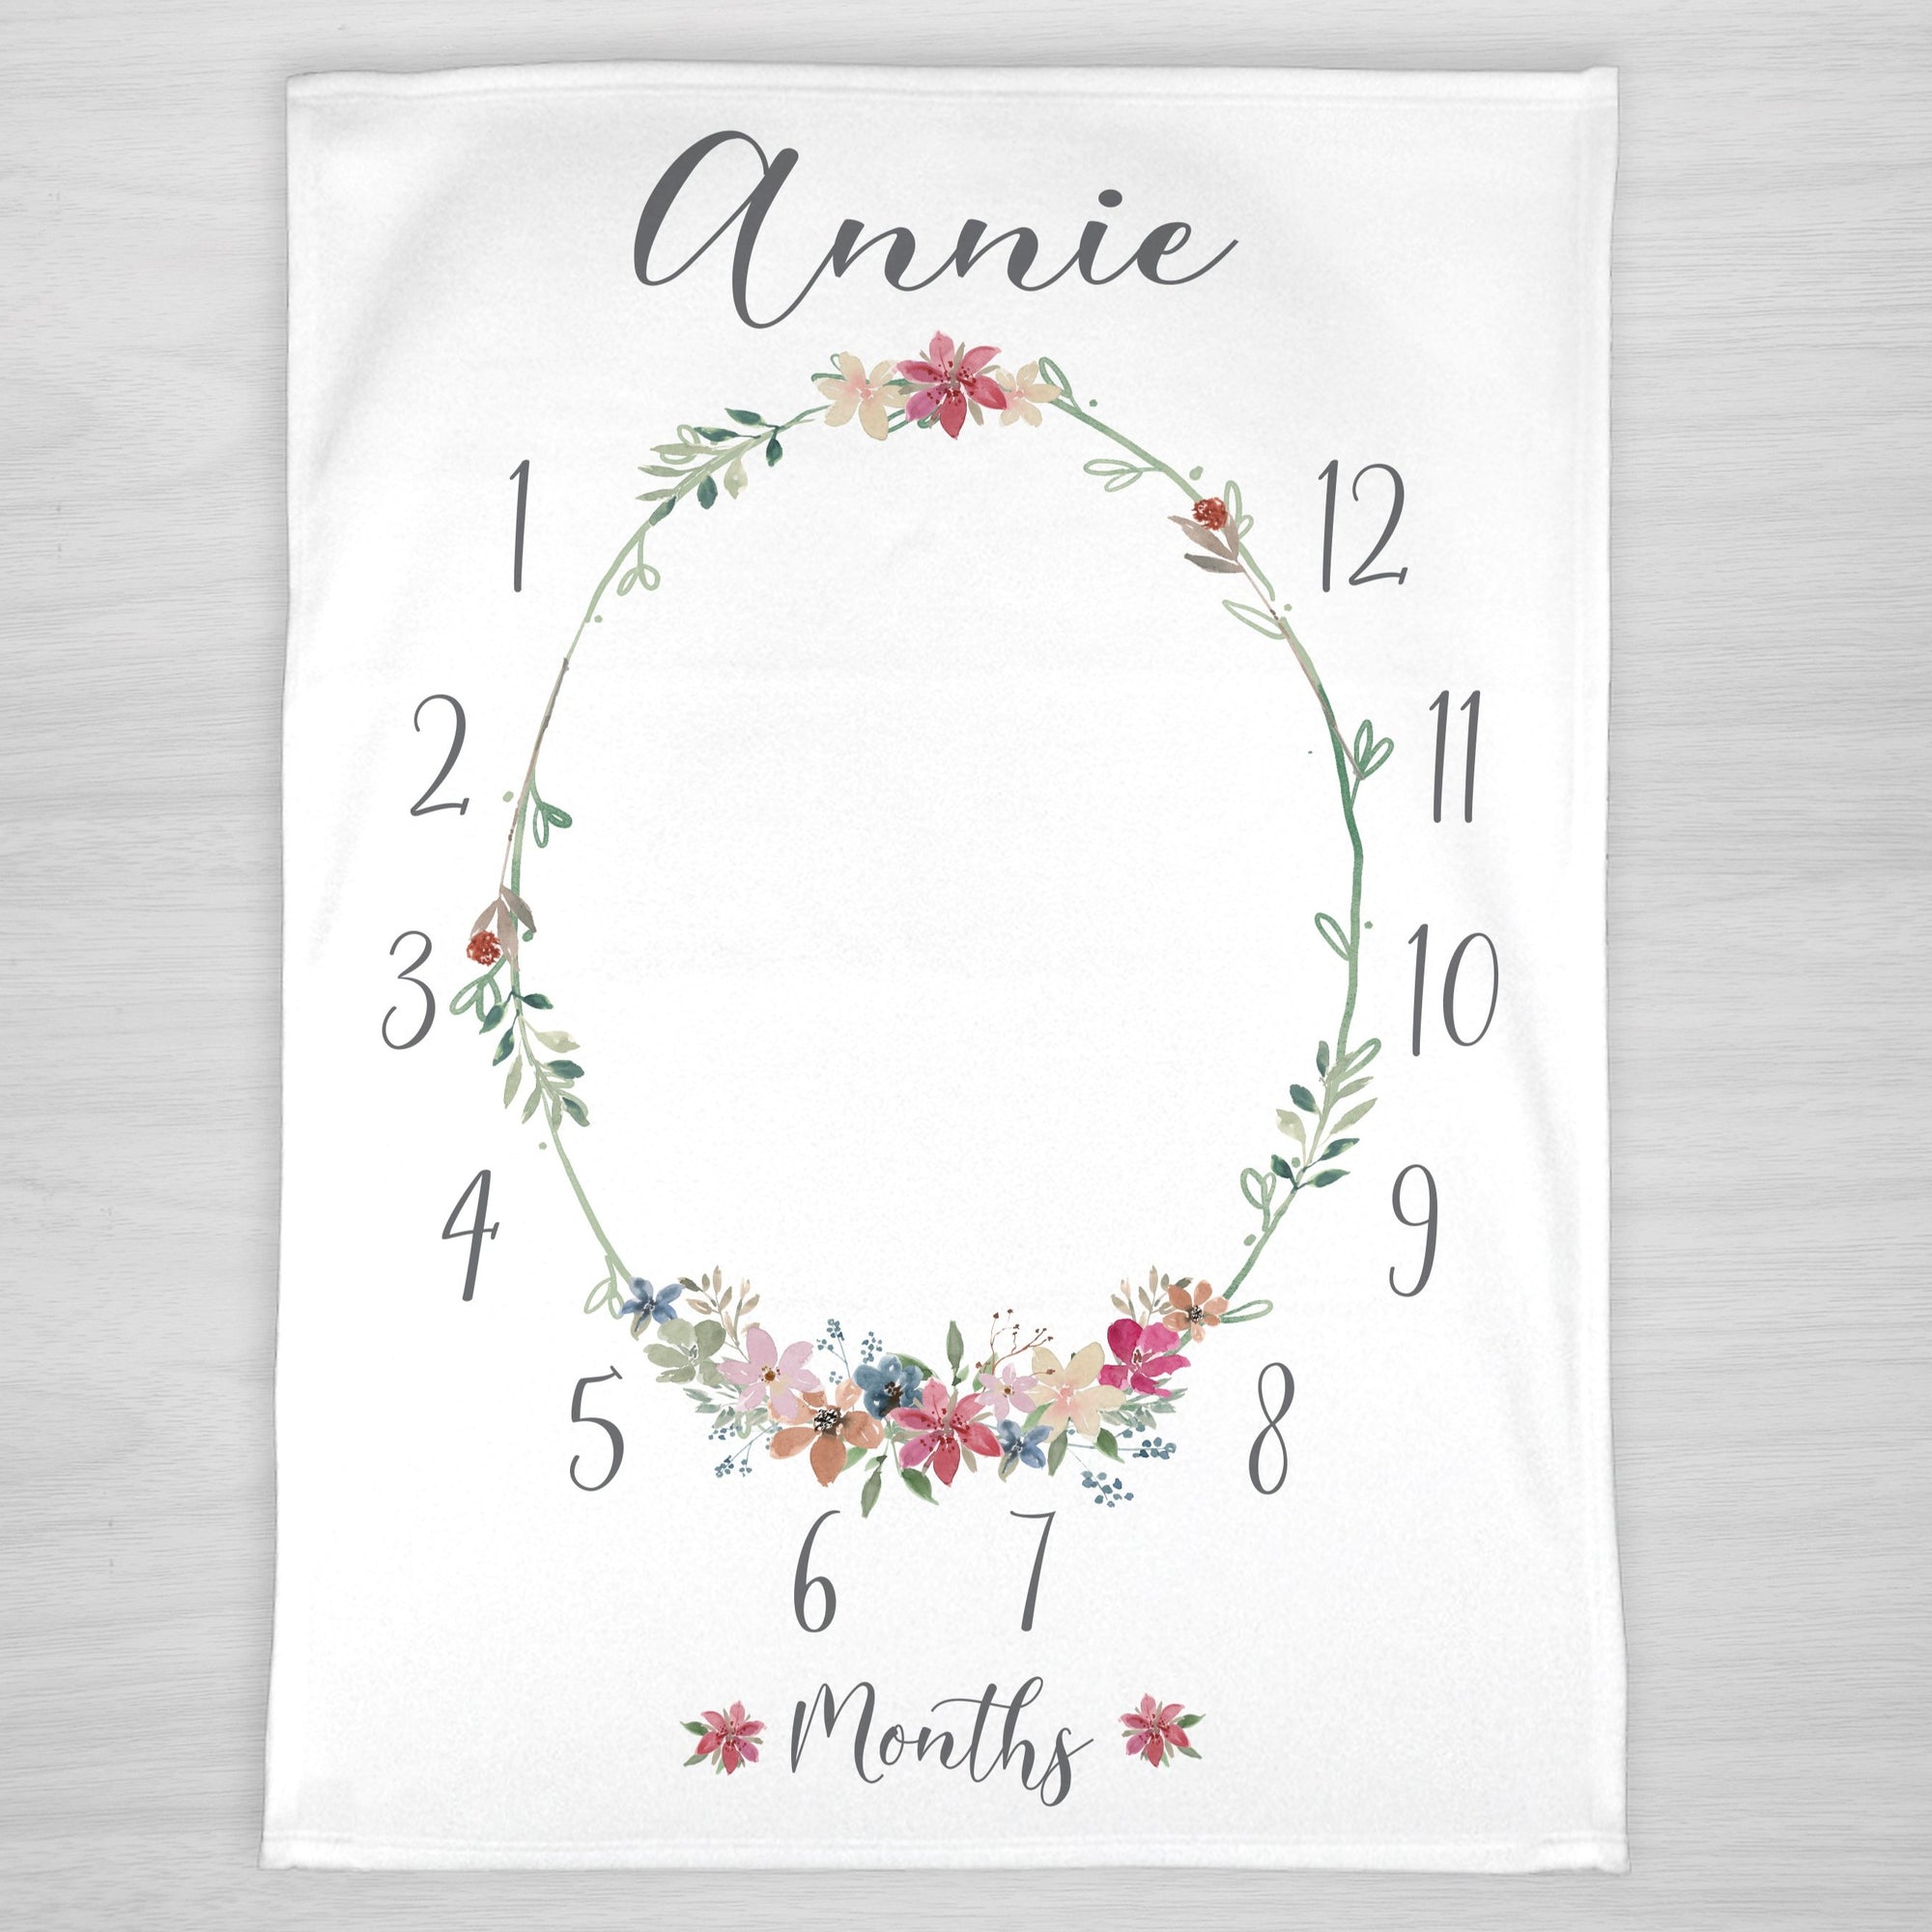 Wildflower Wreath Milestone blanket, delicate floral wreath, personalized with baby girl's name